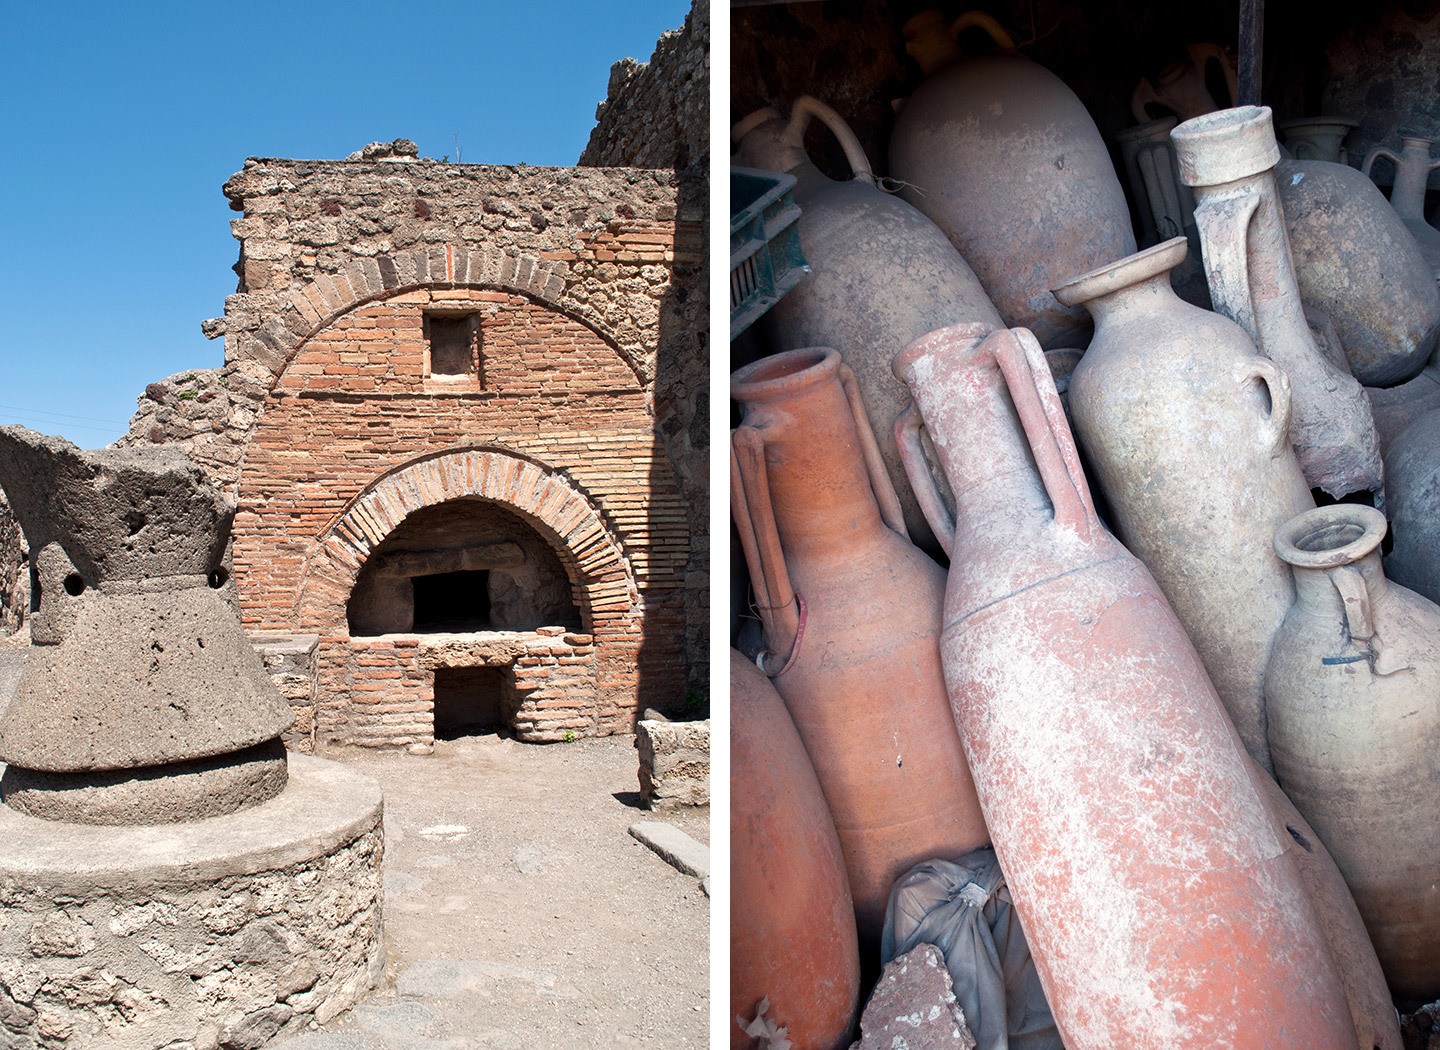 A Pompeii archway and amphorae clay jars